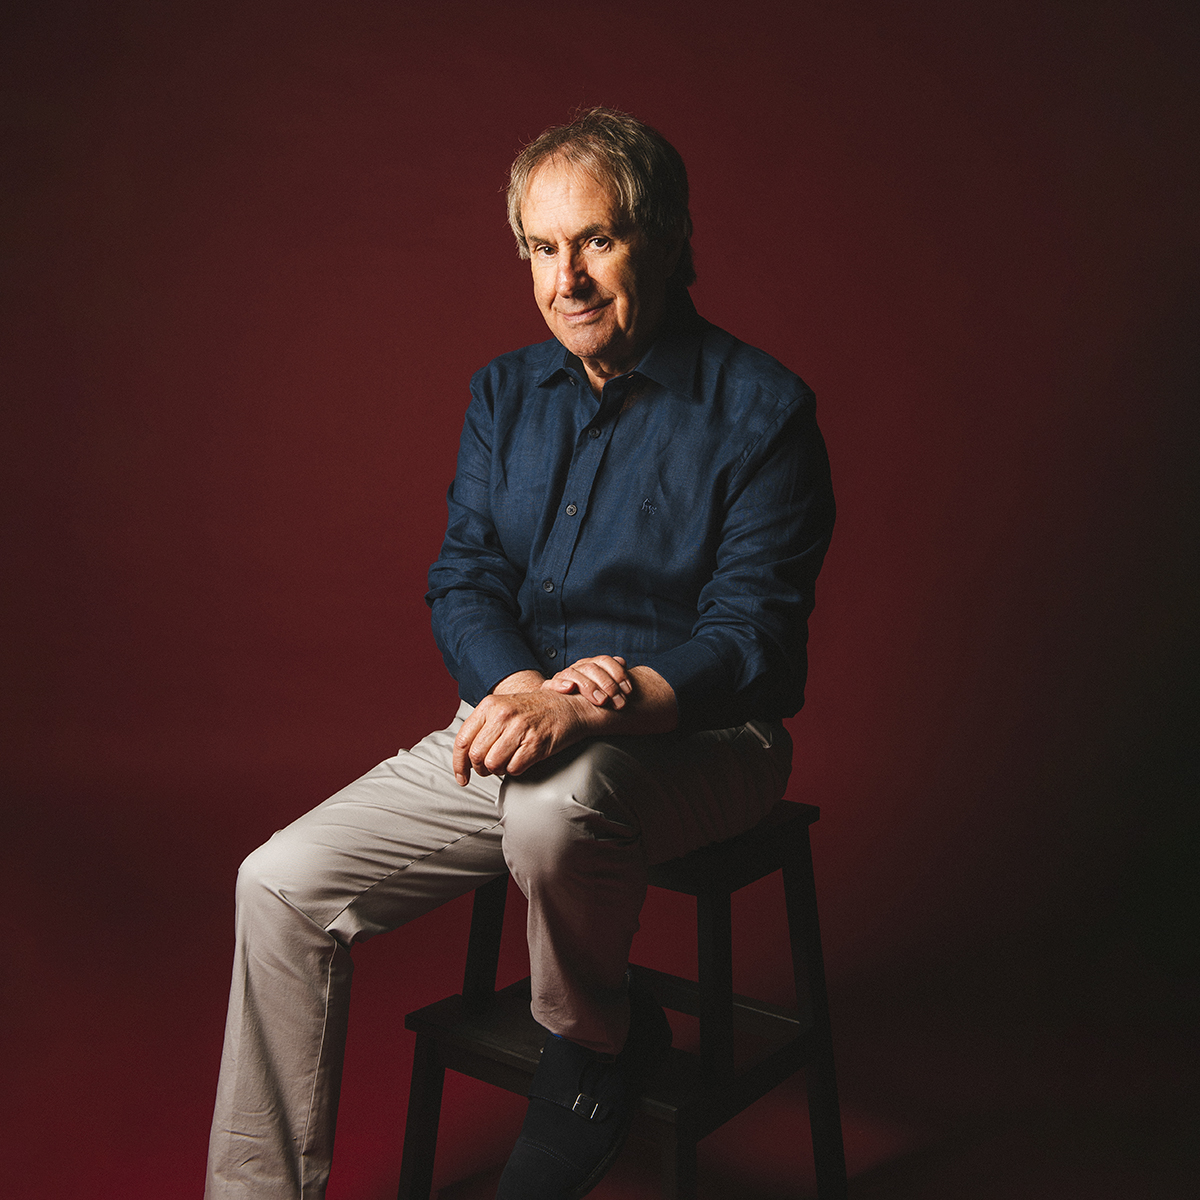 Tonic for Our Troubled Times, Chris de Burgh Re-Imagines a Fabled Tale & Folklore Favourite in New Album, The Legend of Robin Hood